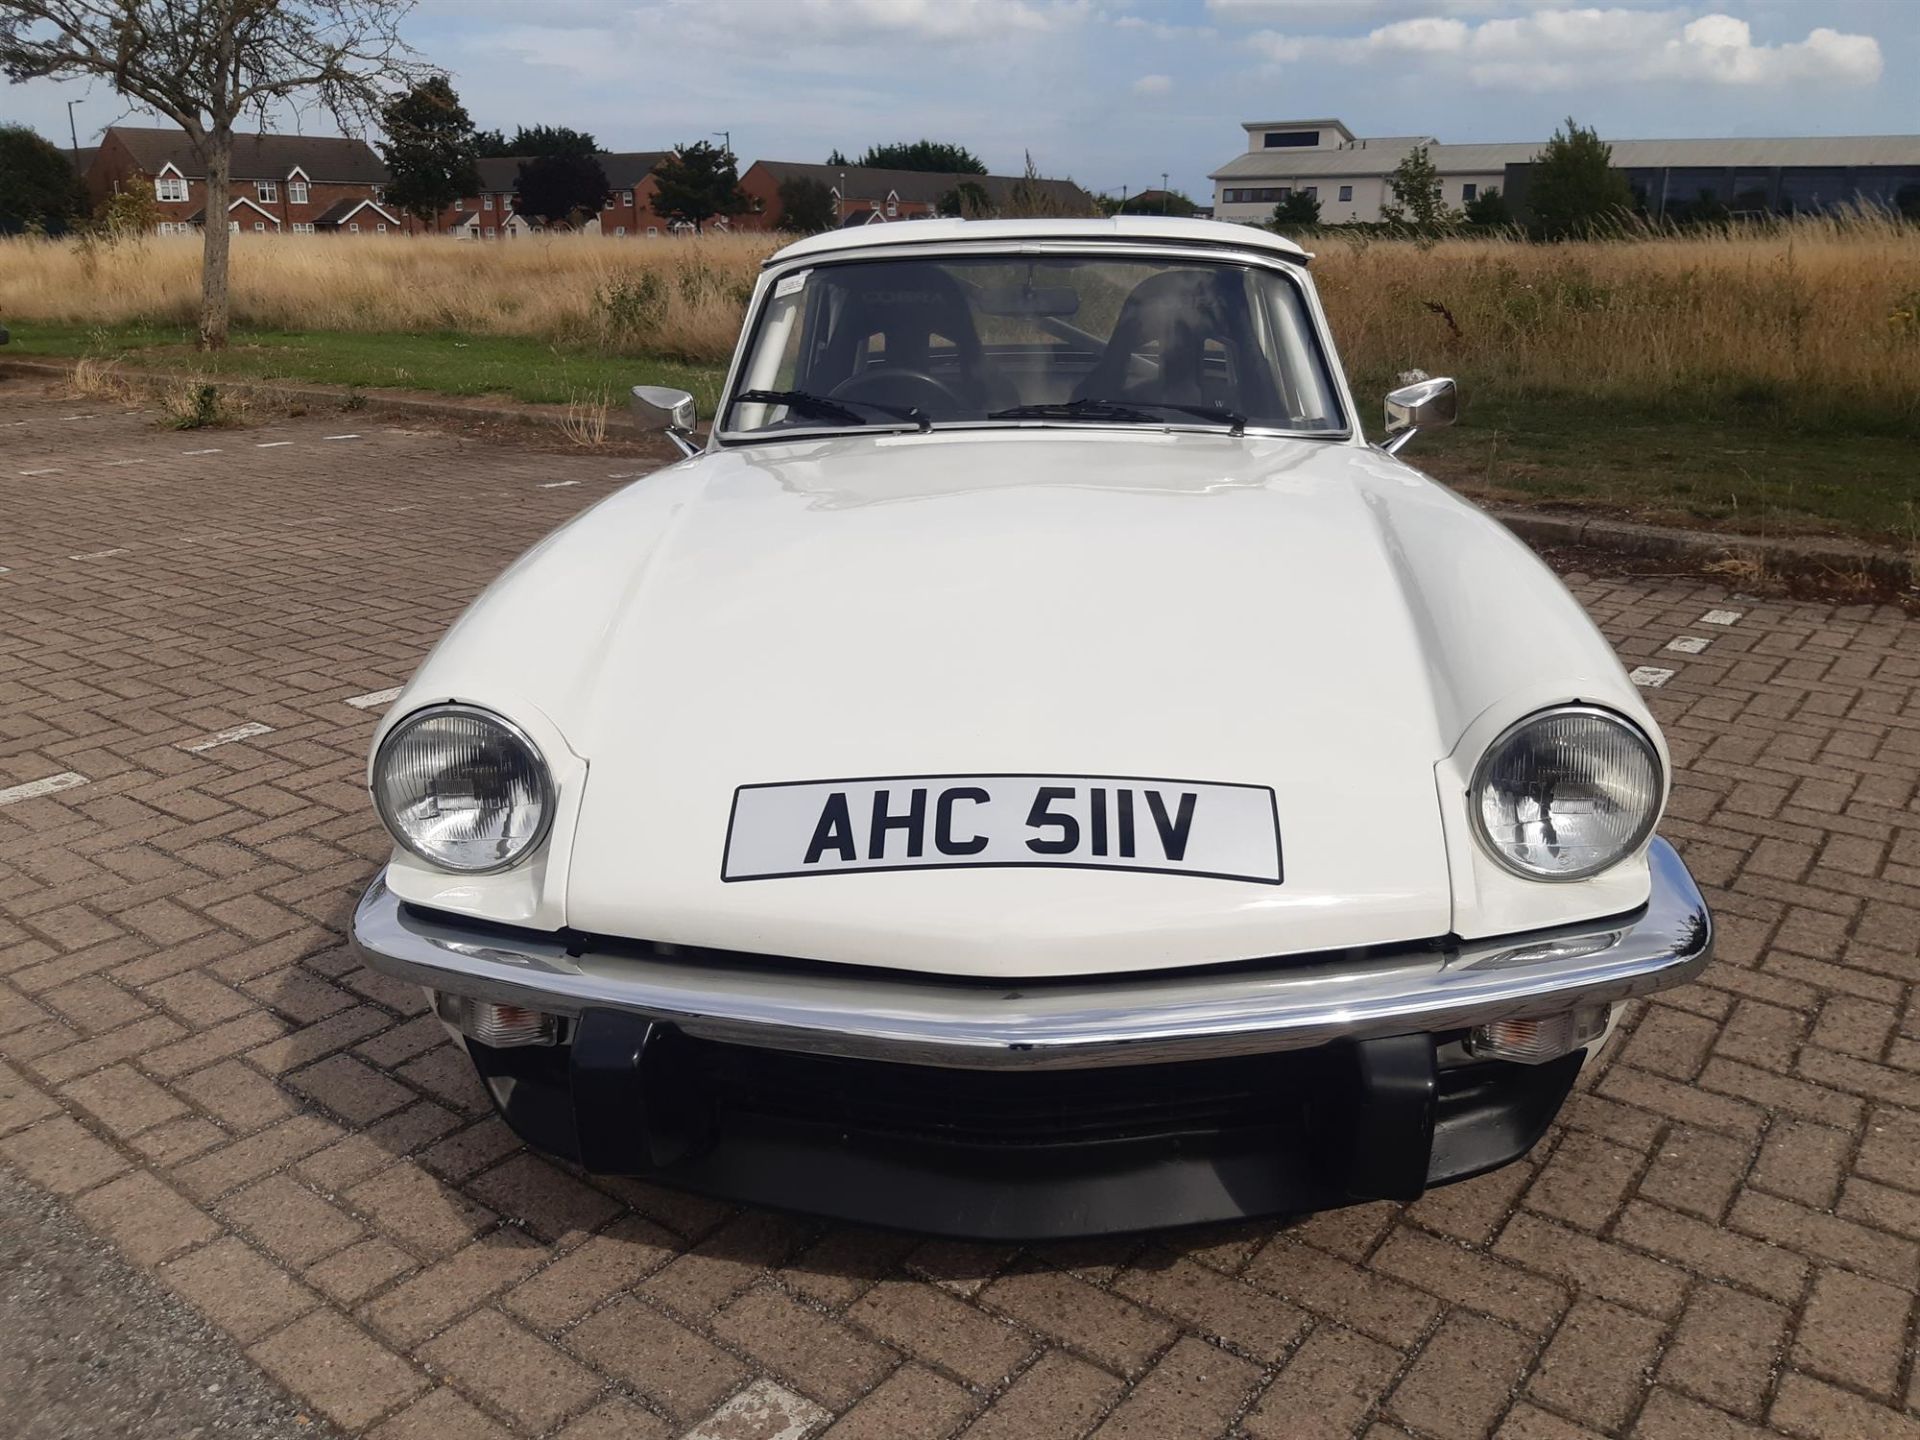 1980 Triumph Spitfire 1500 Fast Road Comvertible with Hardtop - Image 7 of 10